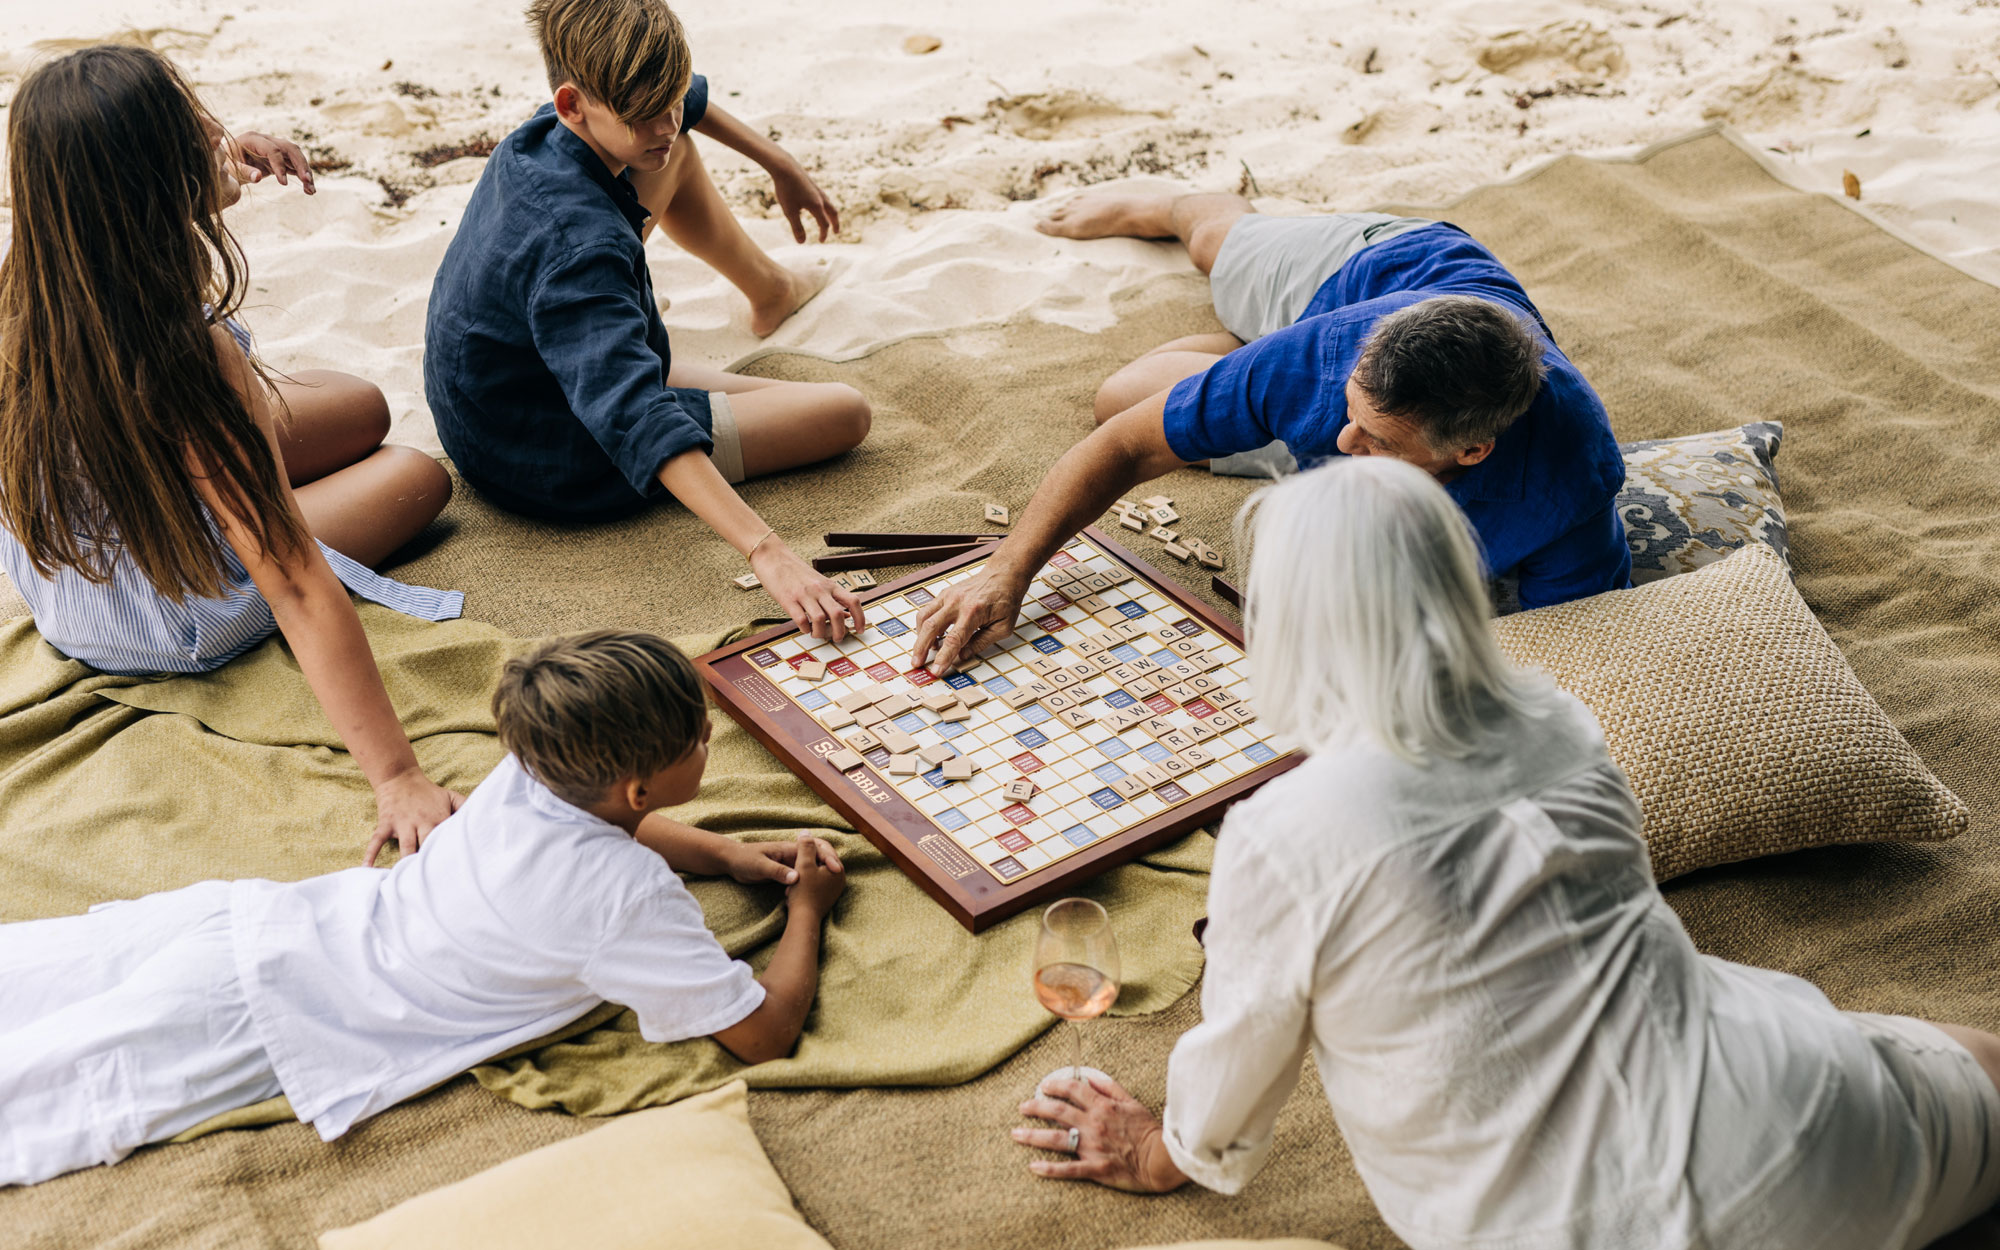 Games on the beach